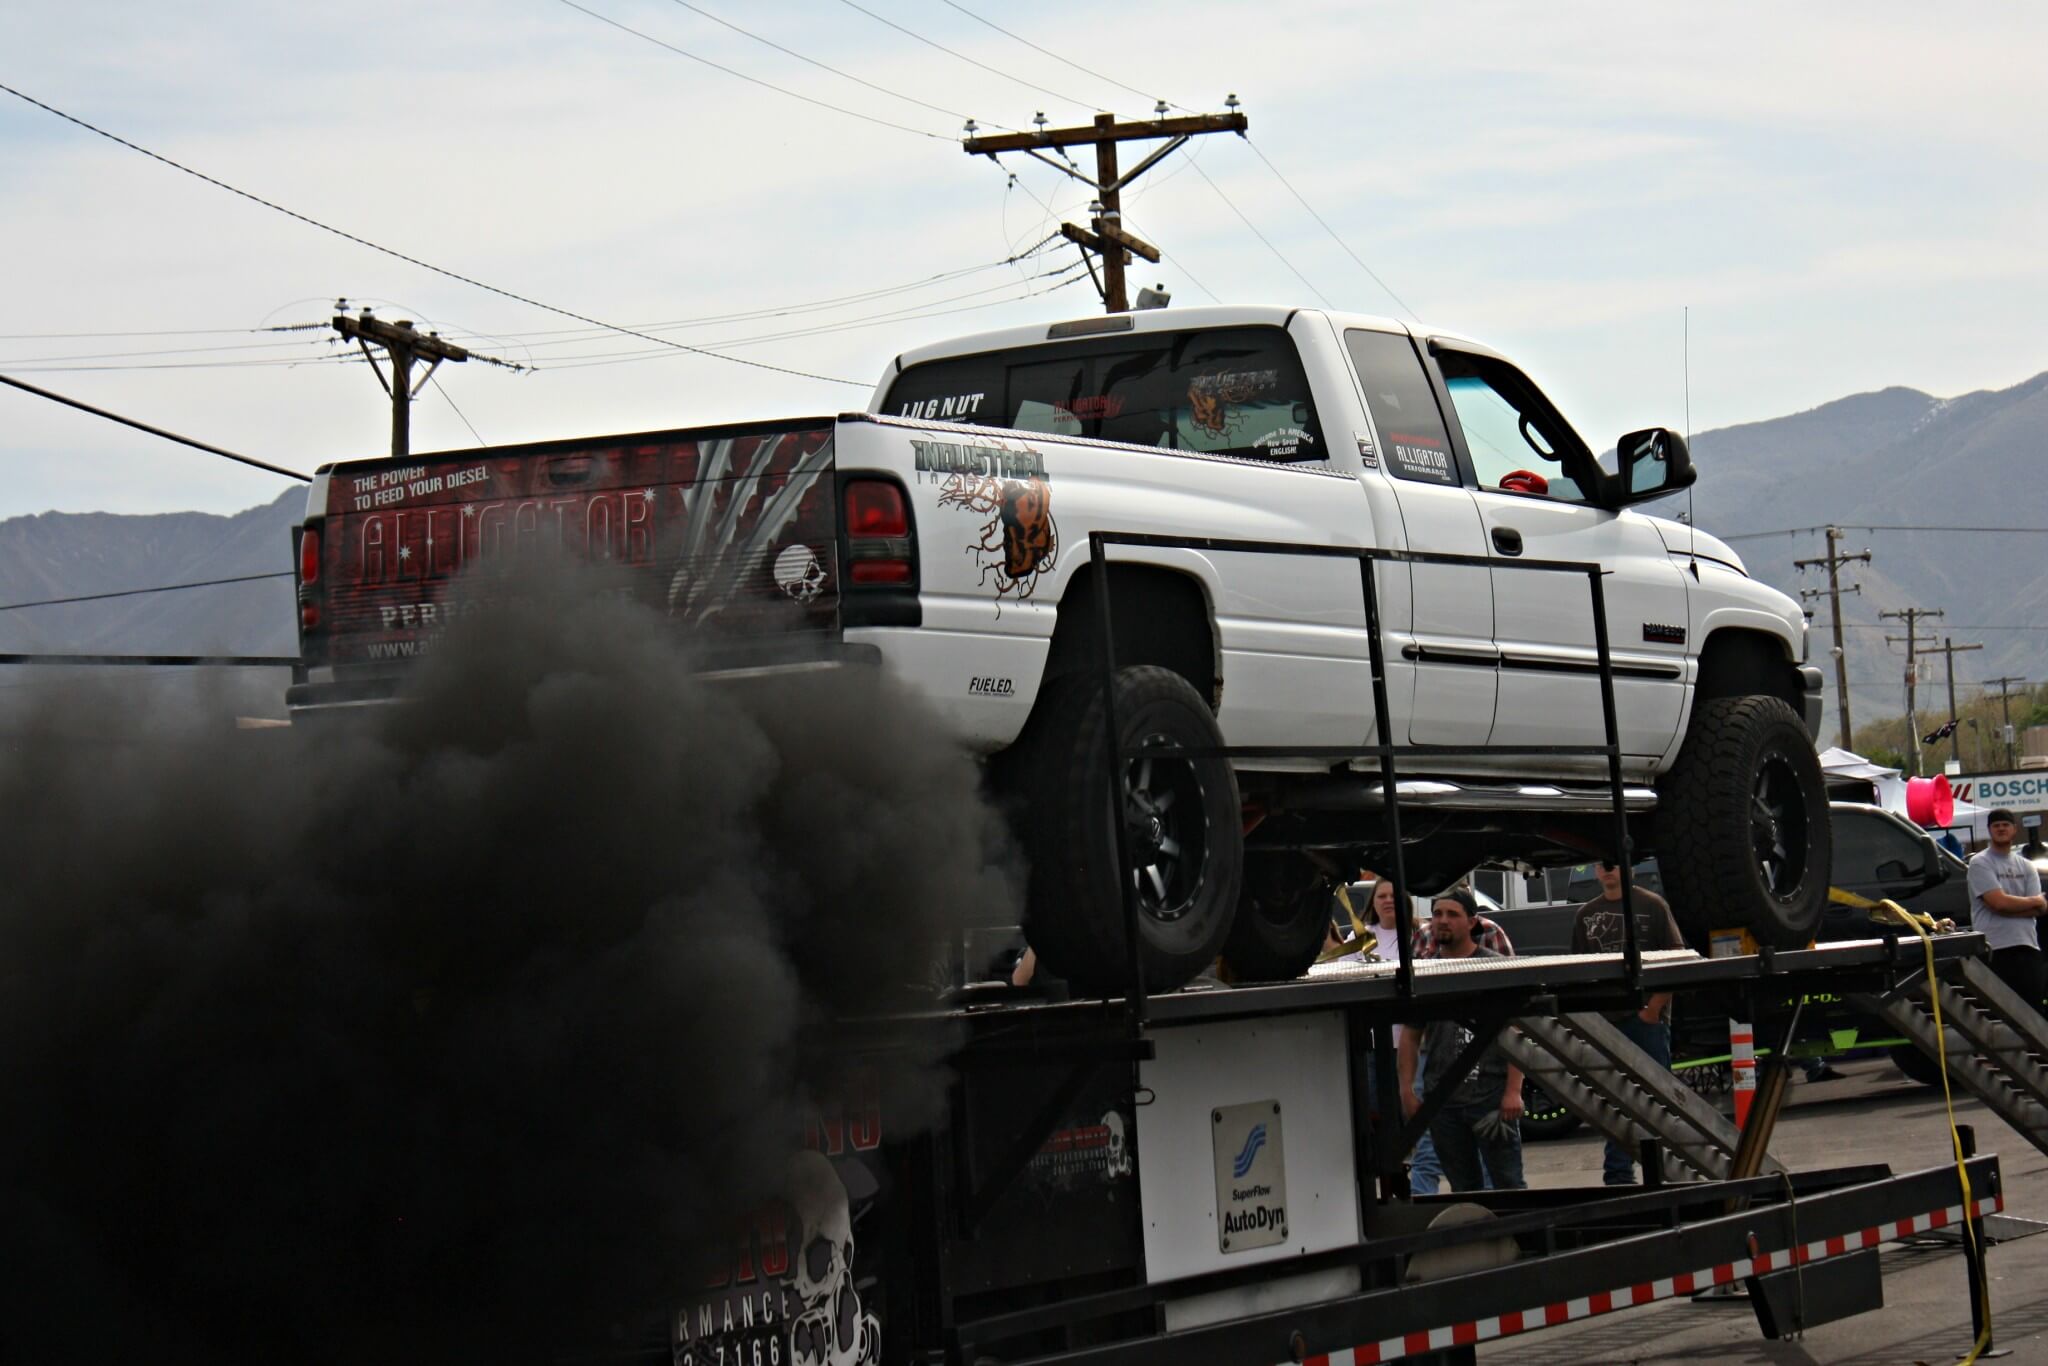 Scott Humphrey, a sales technician at Alligator Performance, made the long journey down from Couer d’Alene, Idaho, for the big event. His 24V Cummins has a set of 64/480 compound turbos from Industrial Injection and managed to squeeze out 665 hp, not bad for a VP44 injection pump.